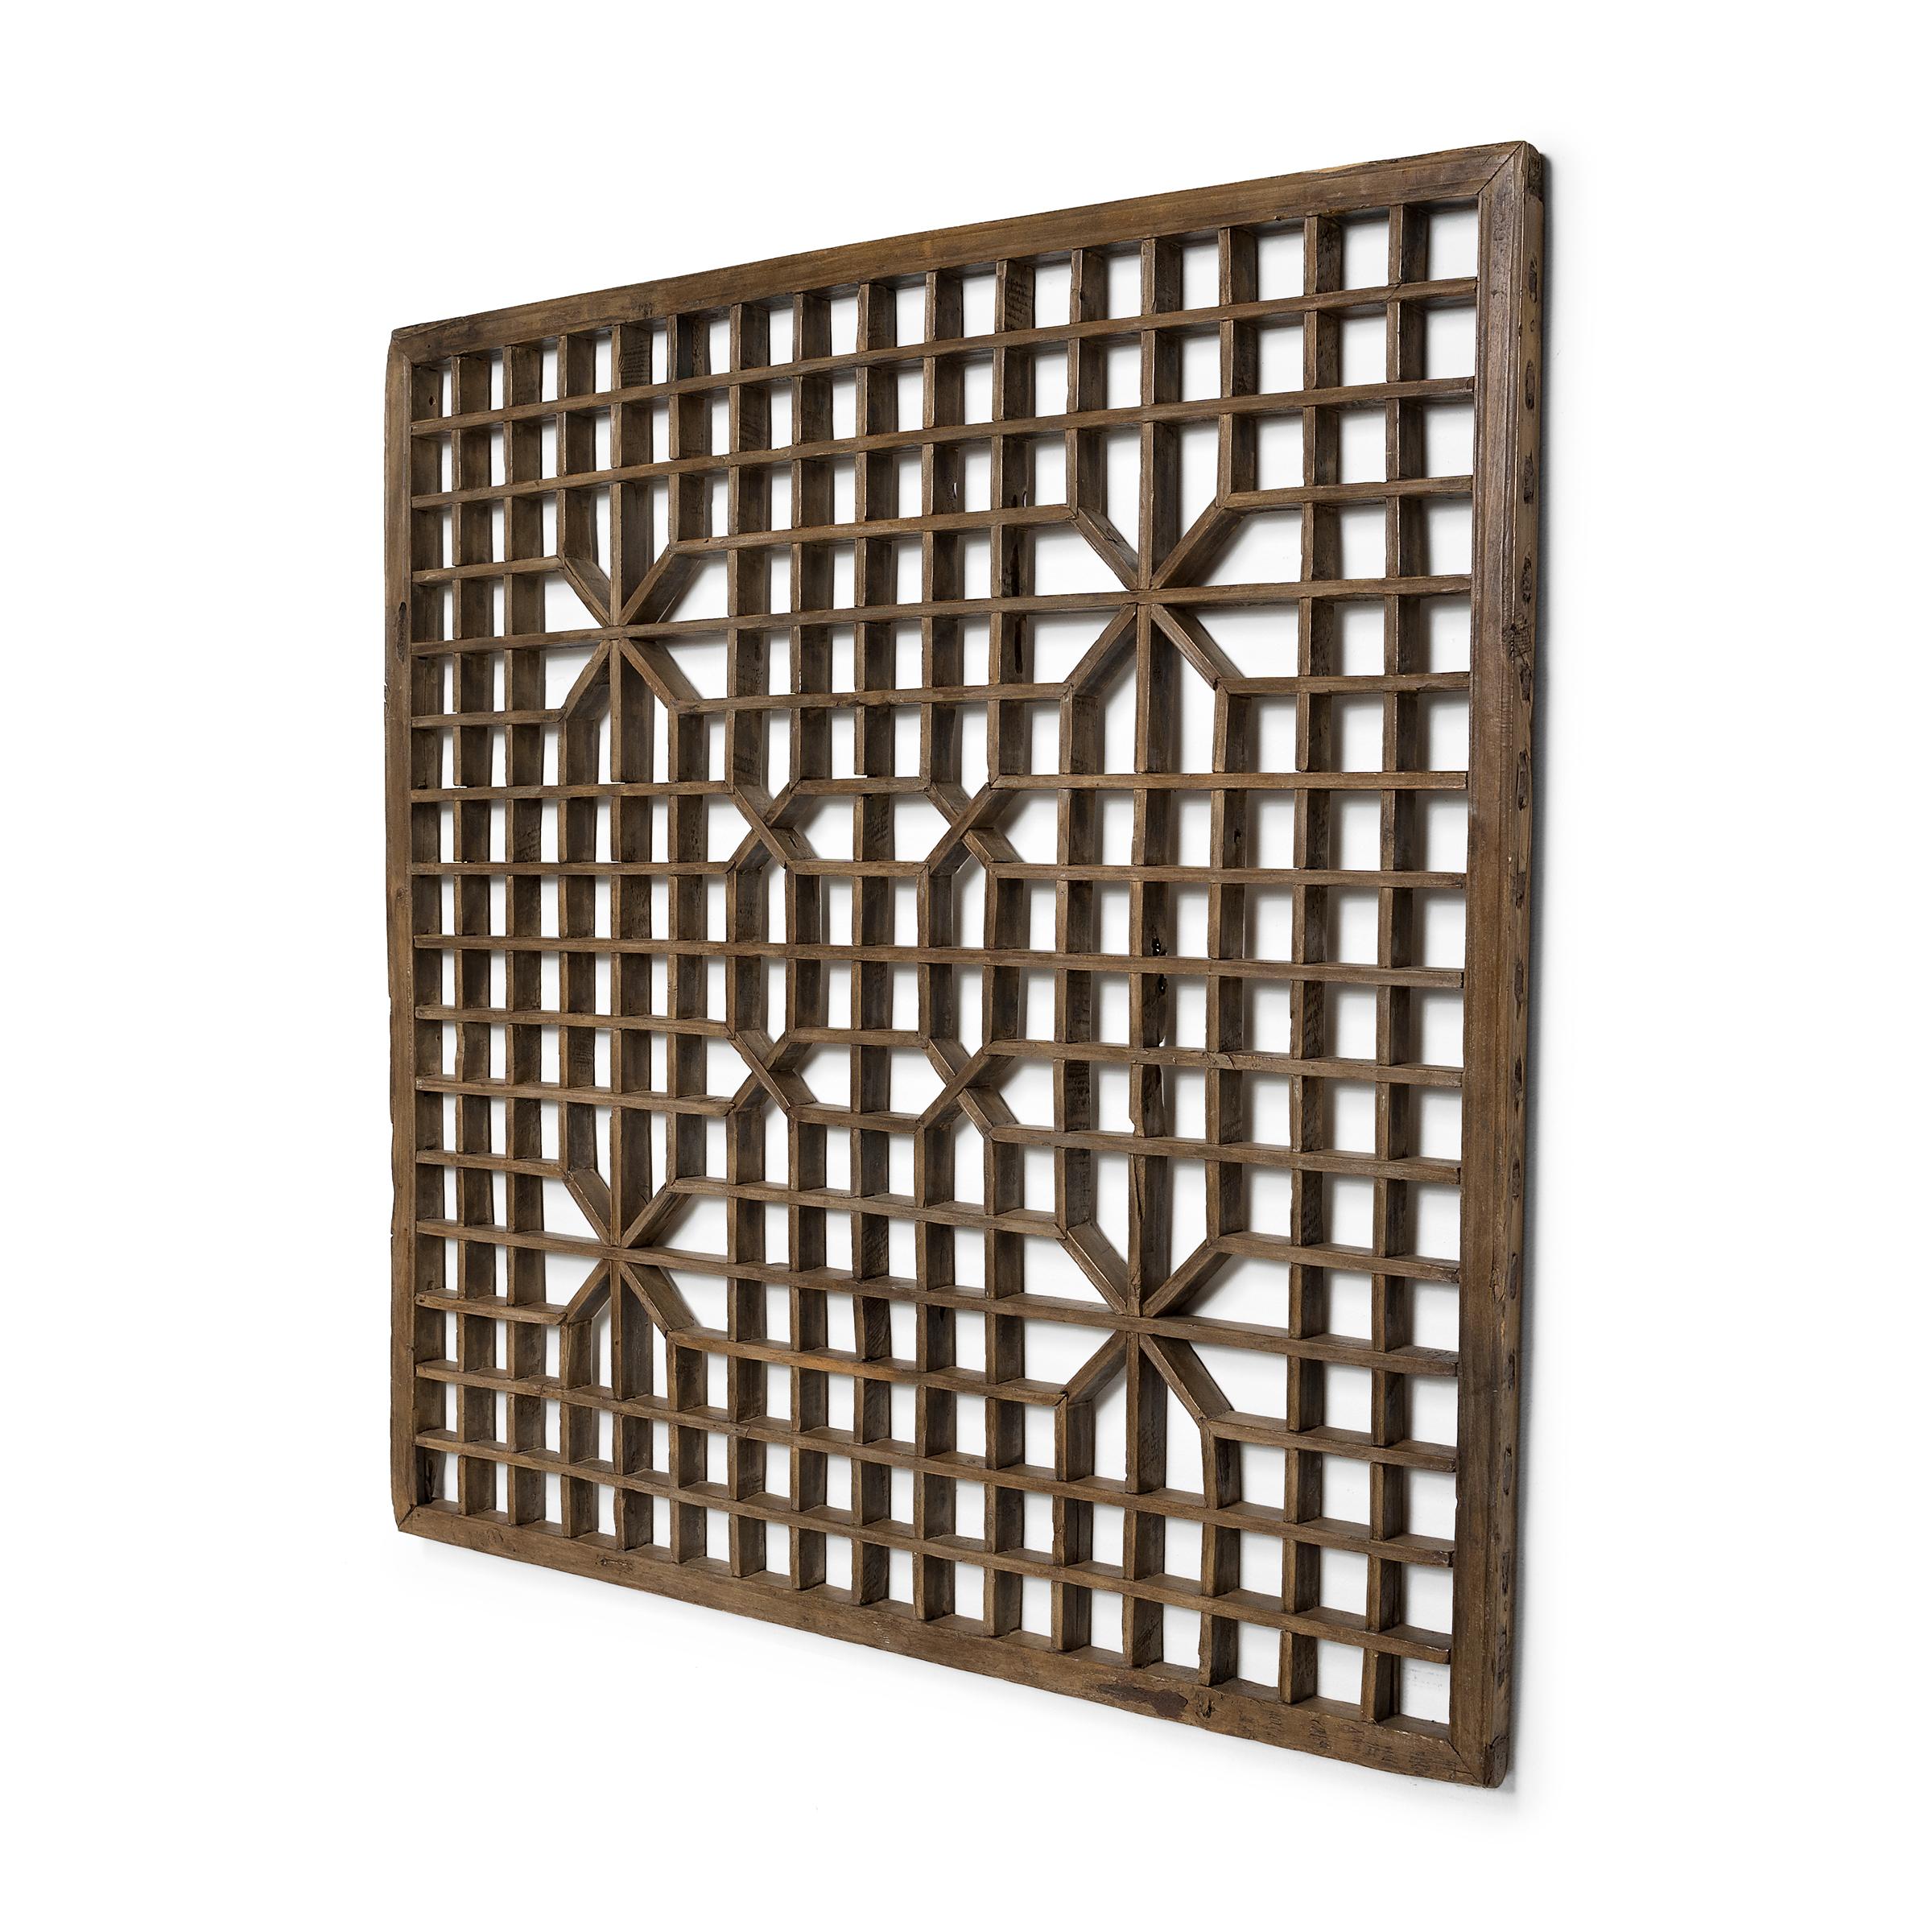 This early 20th century lattice window panel from China's Shanxi province likely originated in a traditional home with balanced interiors. Both functional and decorative, lattice windows allowed for fresh air and light to flow into a room while